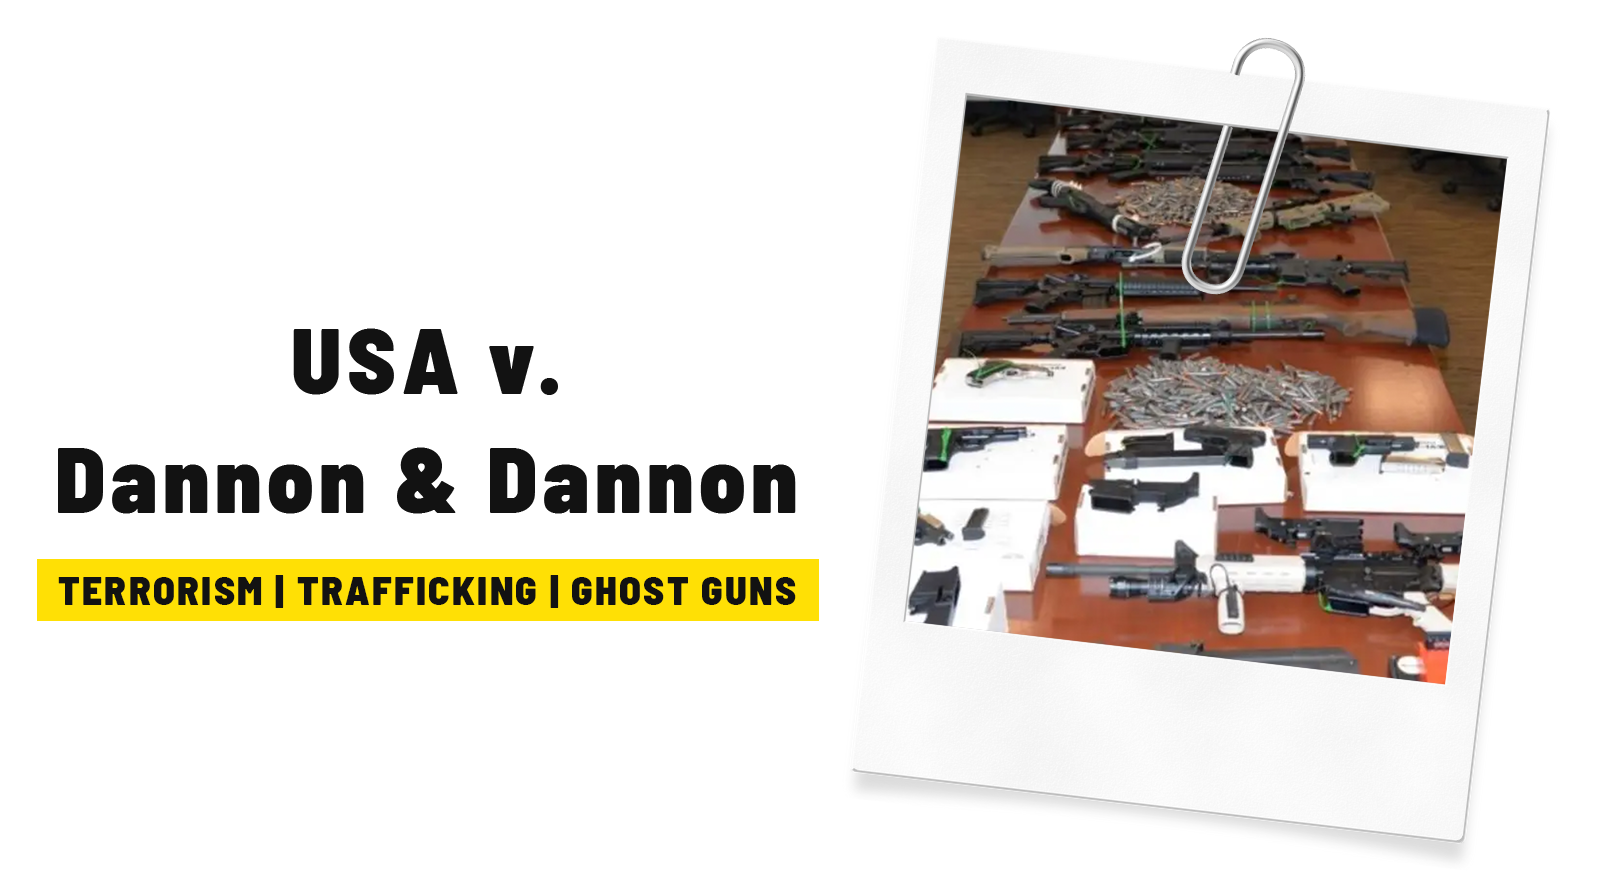 An image that reads "USA v. Dannon & Dannon" with a tag that describes the case as "Terrorism, Trafficking, and Ghost Guns" with an image of the guns recovered from the mentioned court case.